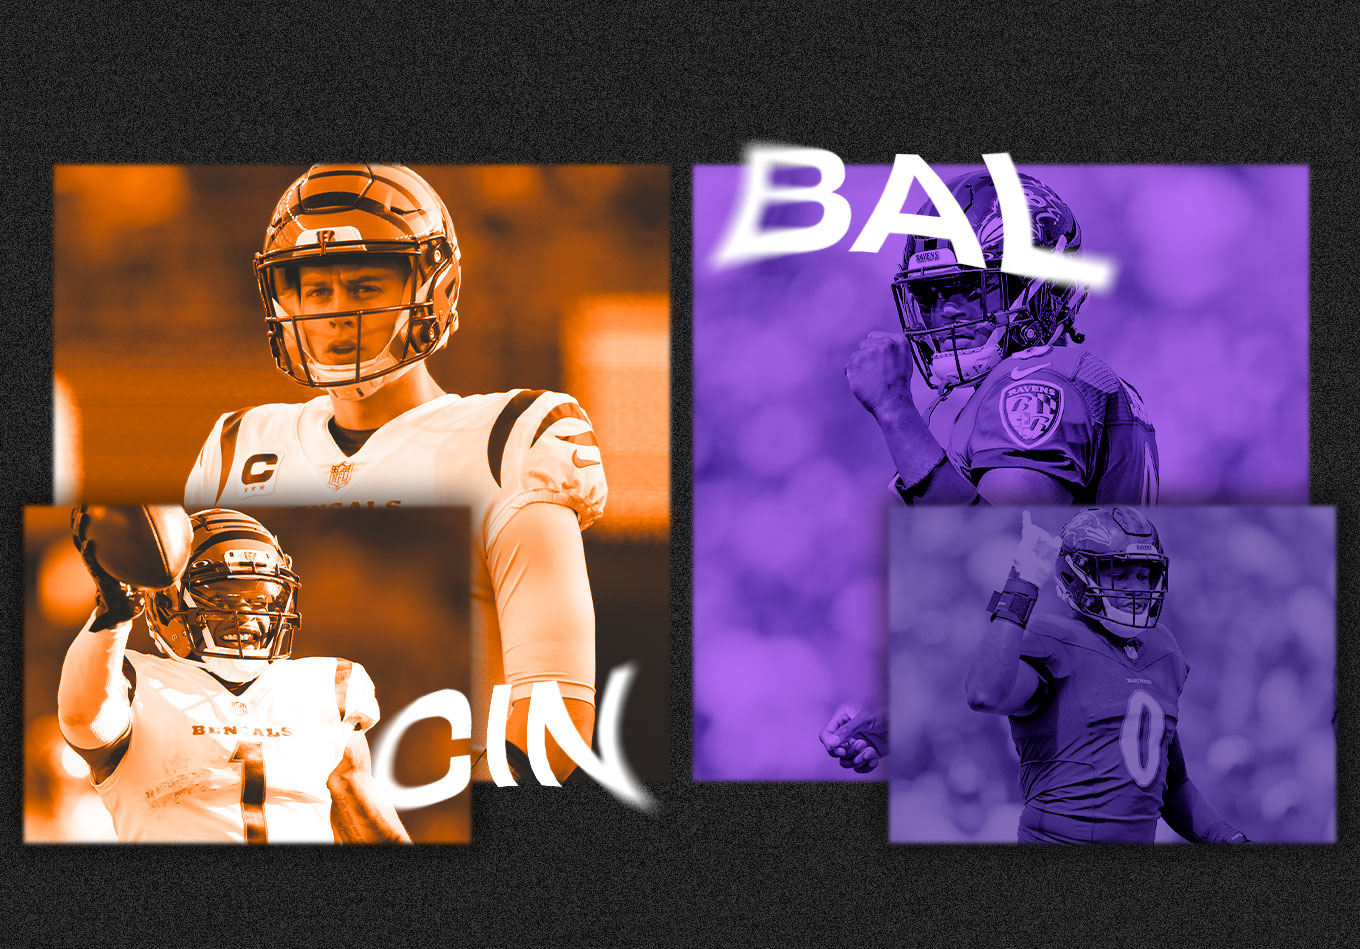 Bengals vs Ravens Prediction: Who Has the Advantage in This Pivotal AFC North Clash?